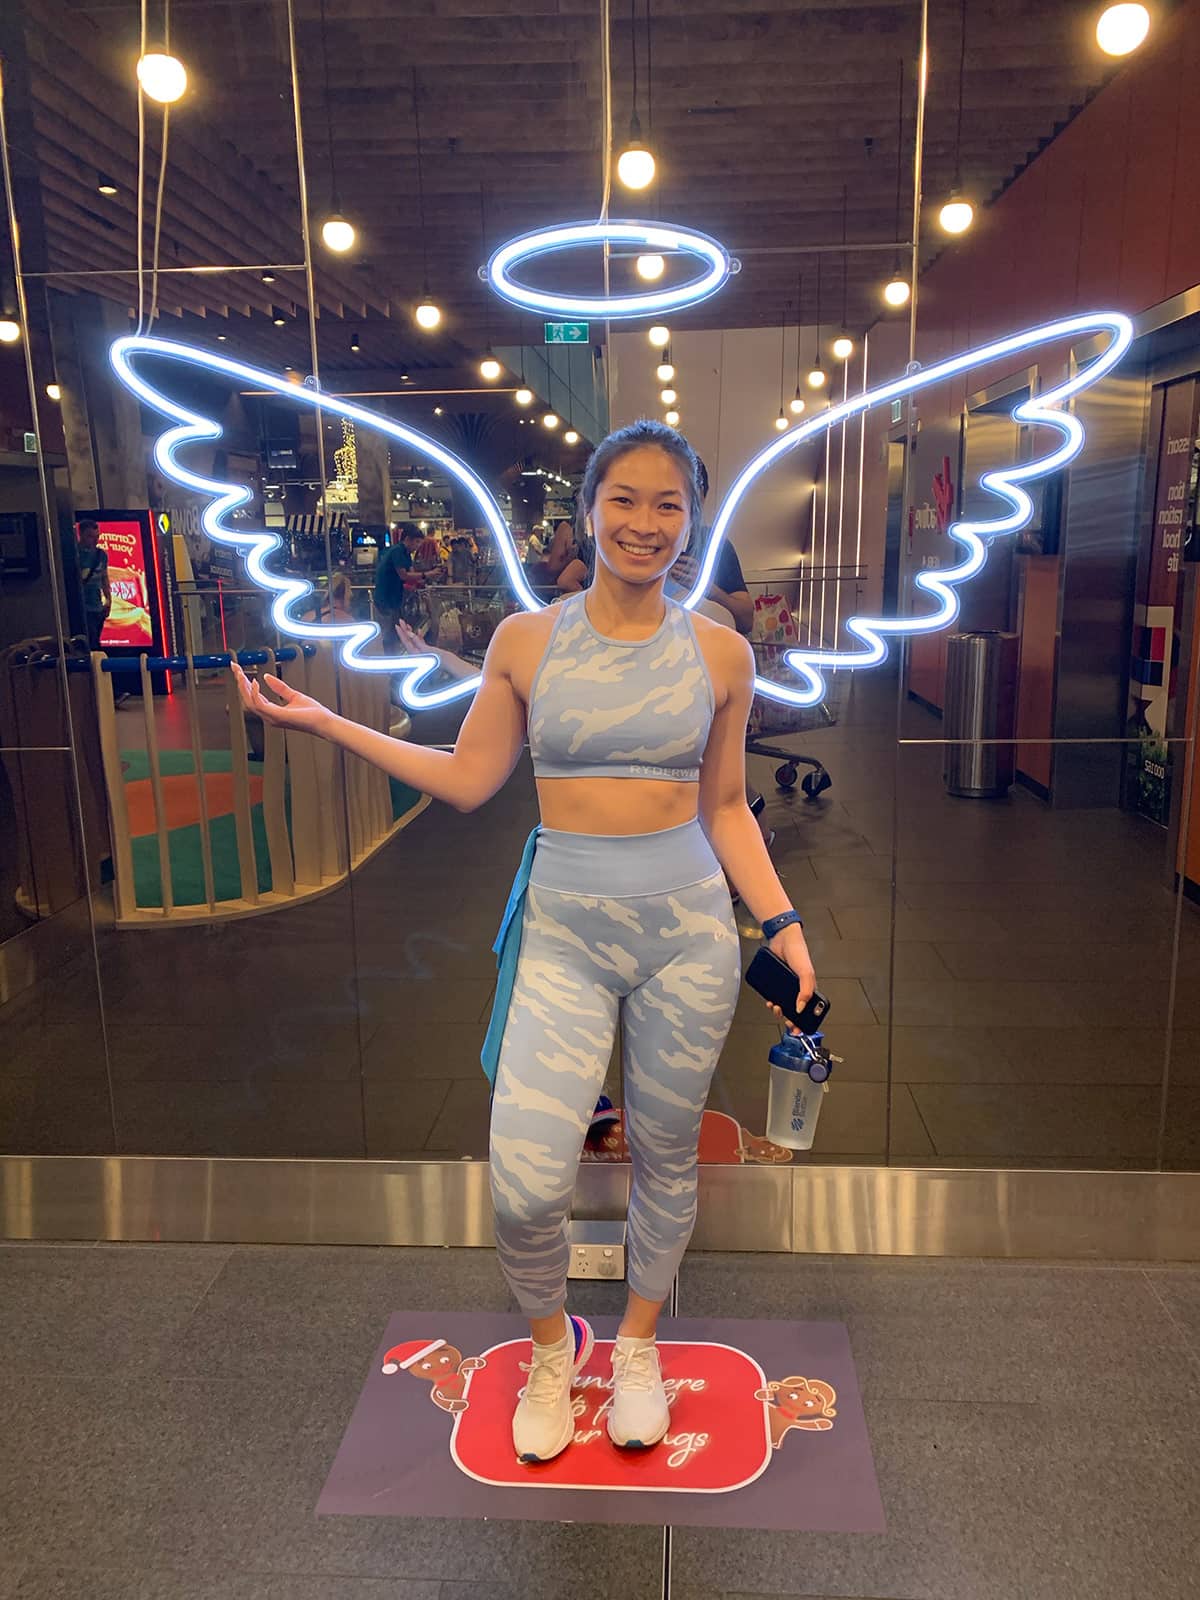 A woman in a sports bra and leggings, holding a bottle in one hand and holding one hand up in the air. She is in front of a backdrop with neon lighting arranged like angel wings